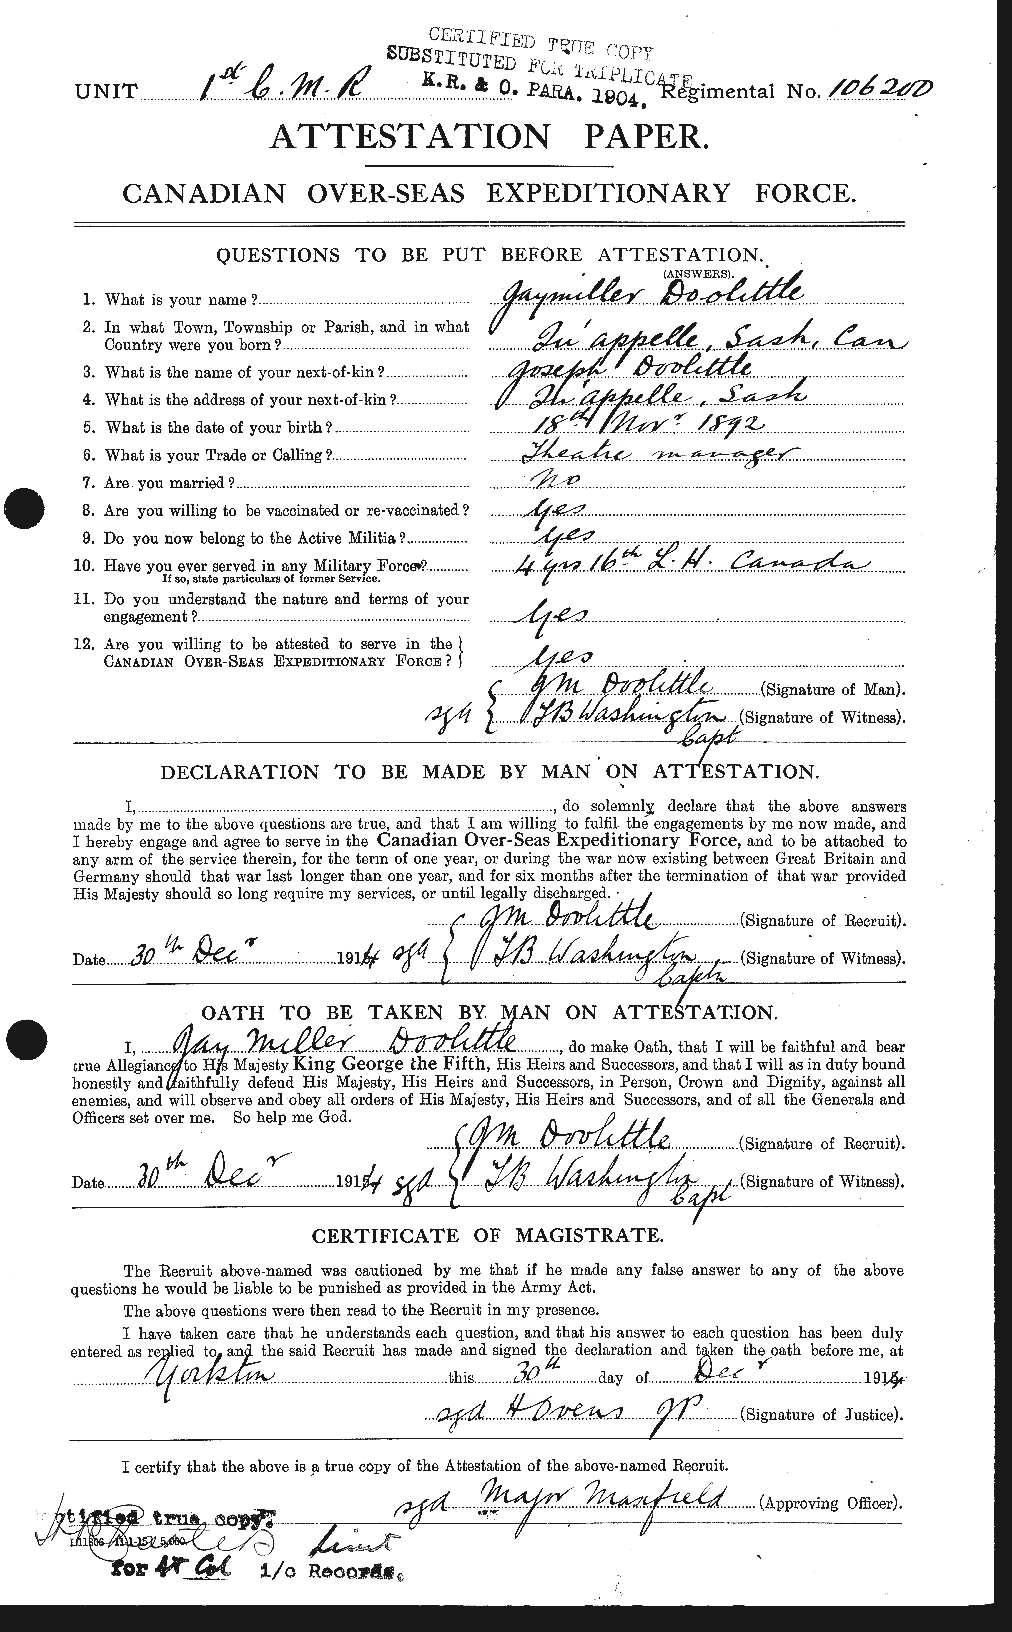 Personnel Records of the First World War - CEF 297975a